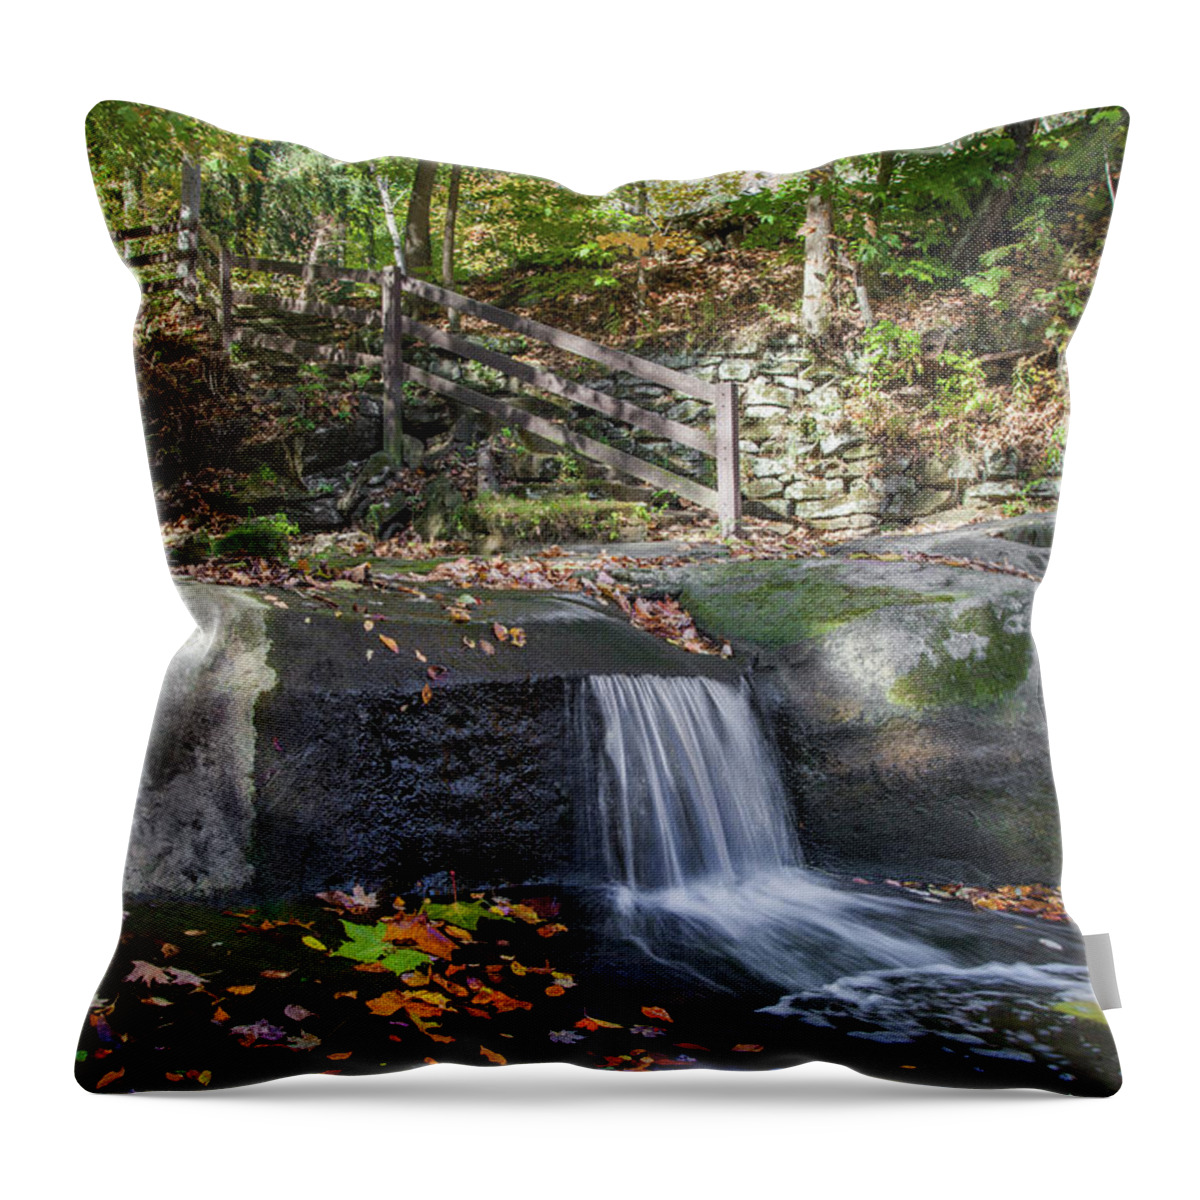 Autumn Glen Throw Pillow featuring the photograph Autumn Glen Olmsted Falls by Lon Dittrick